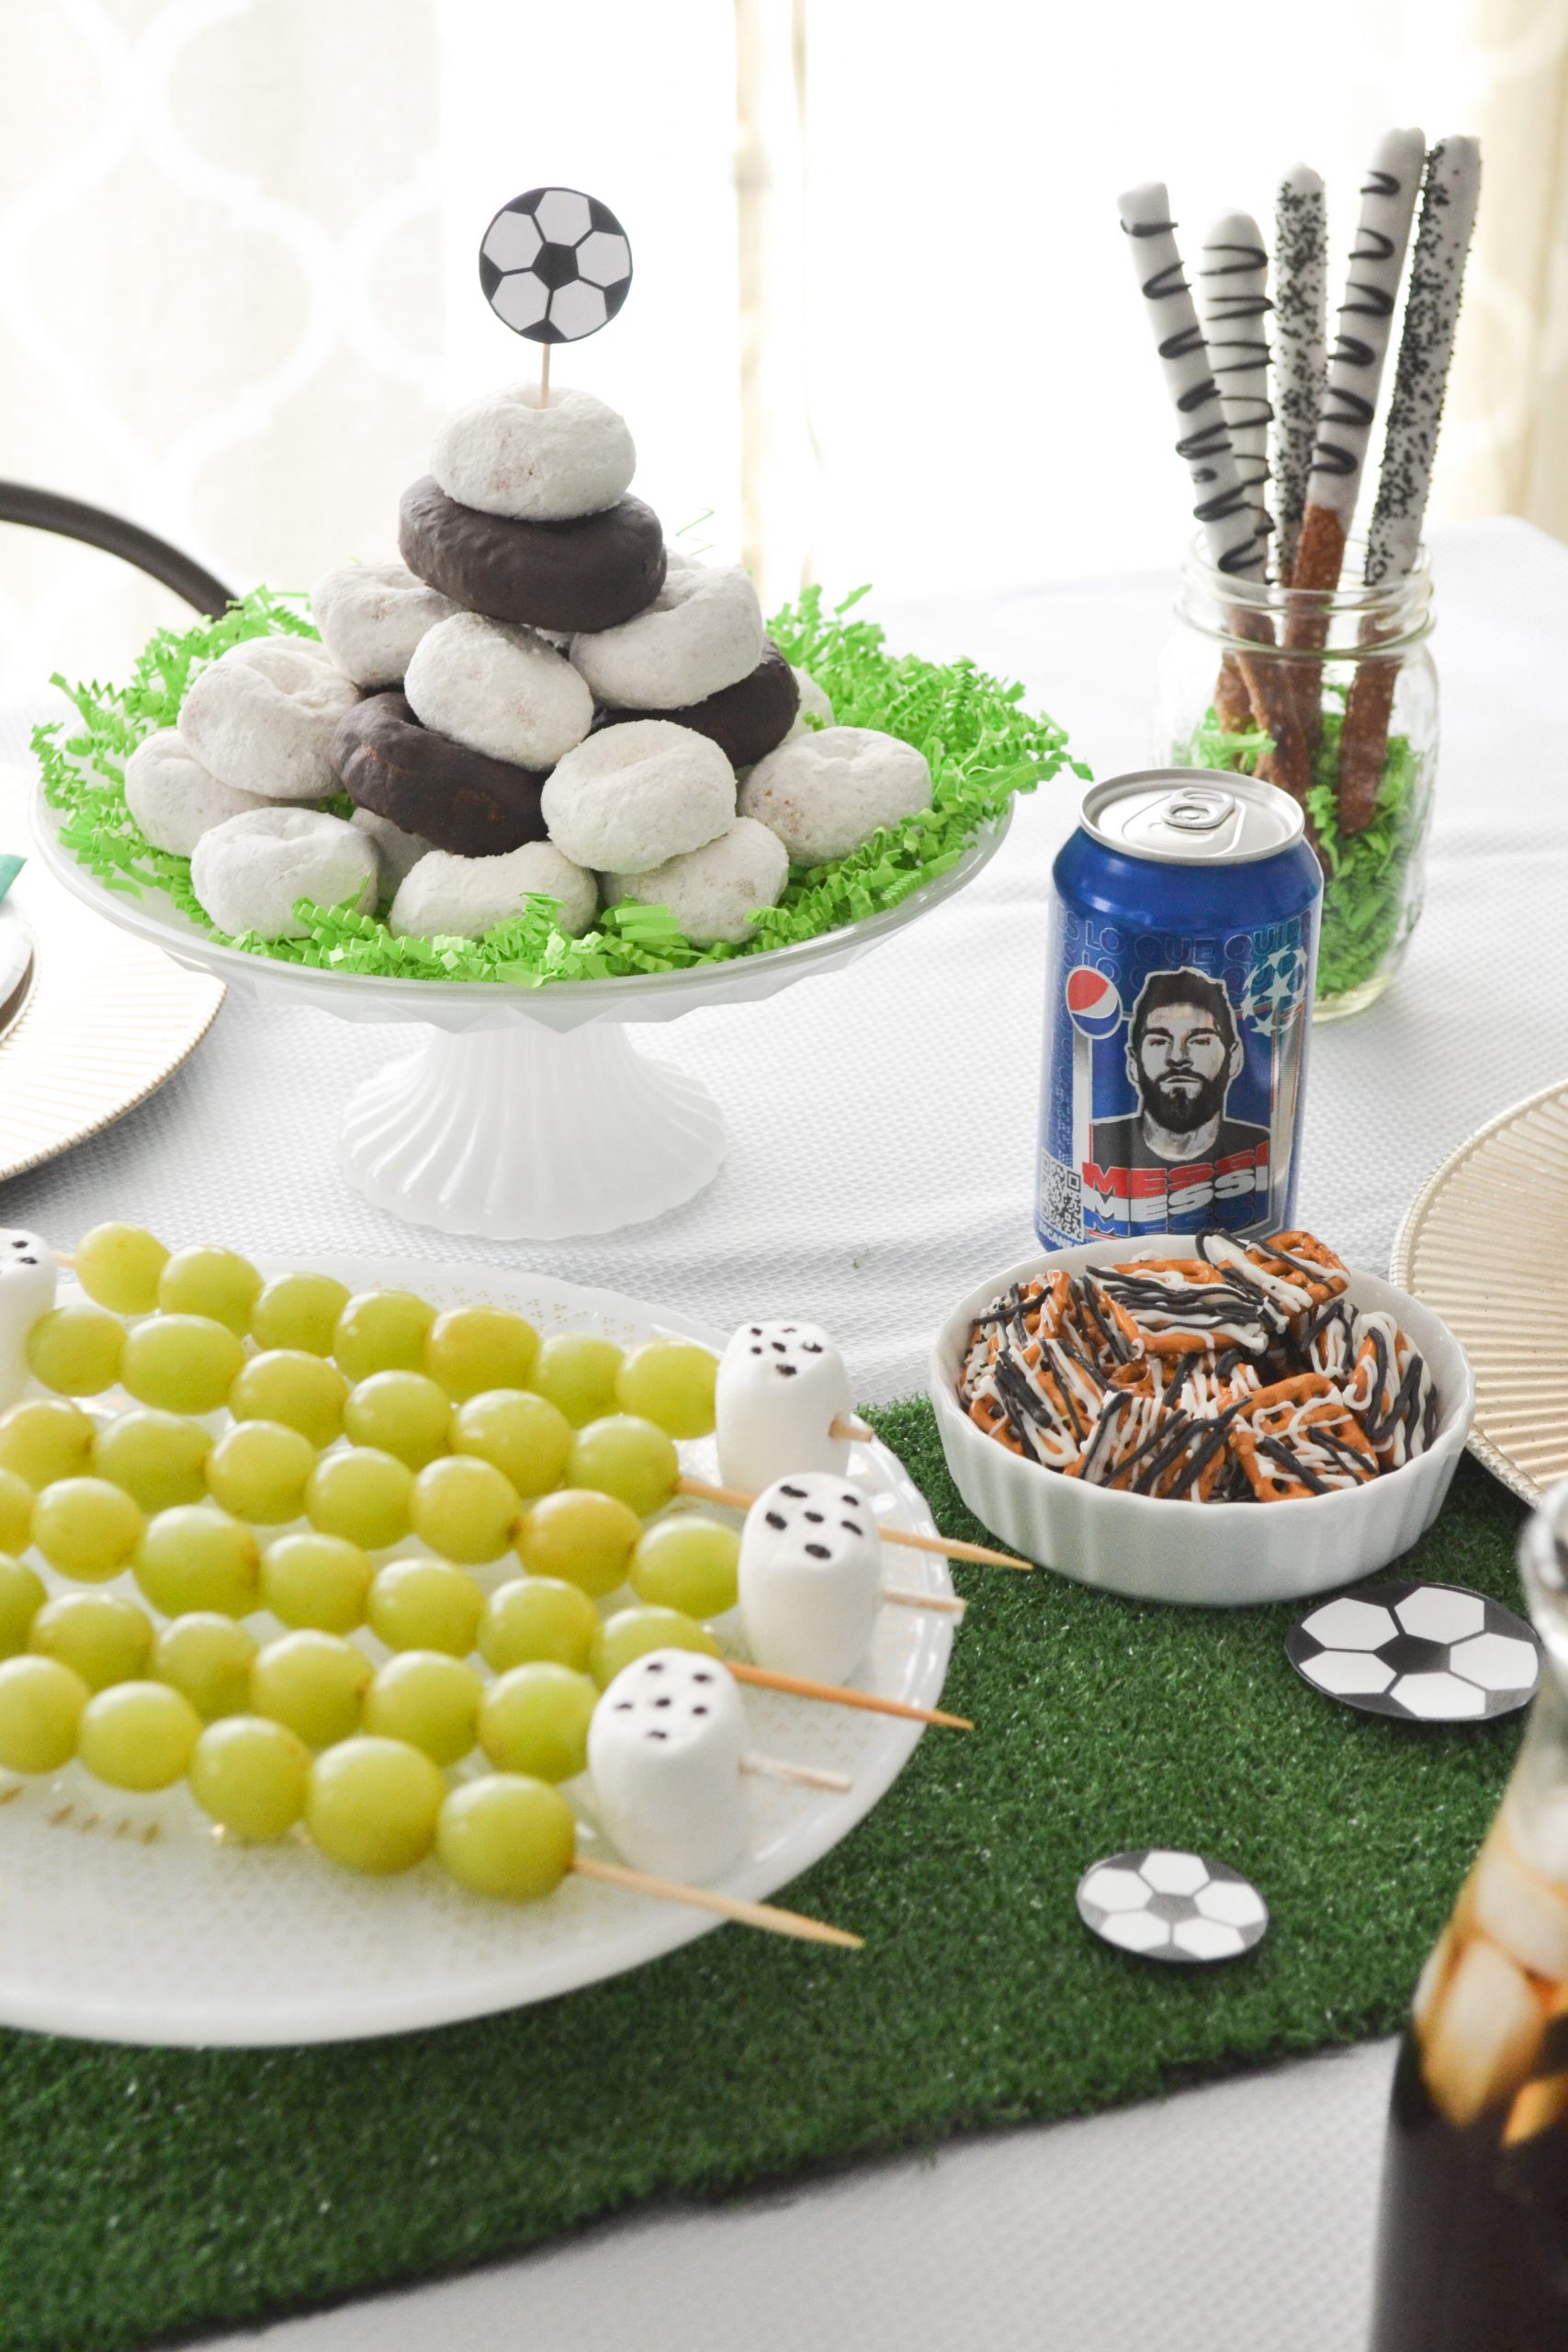 How to Plan a "Goal Worthy" Soccer Themed Party